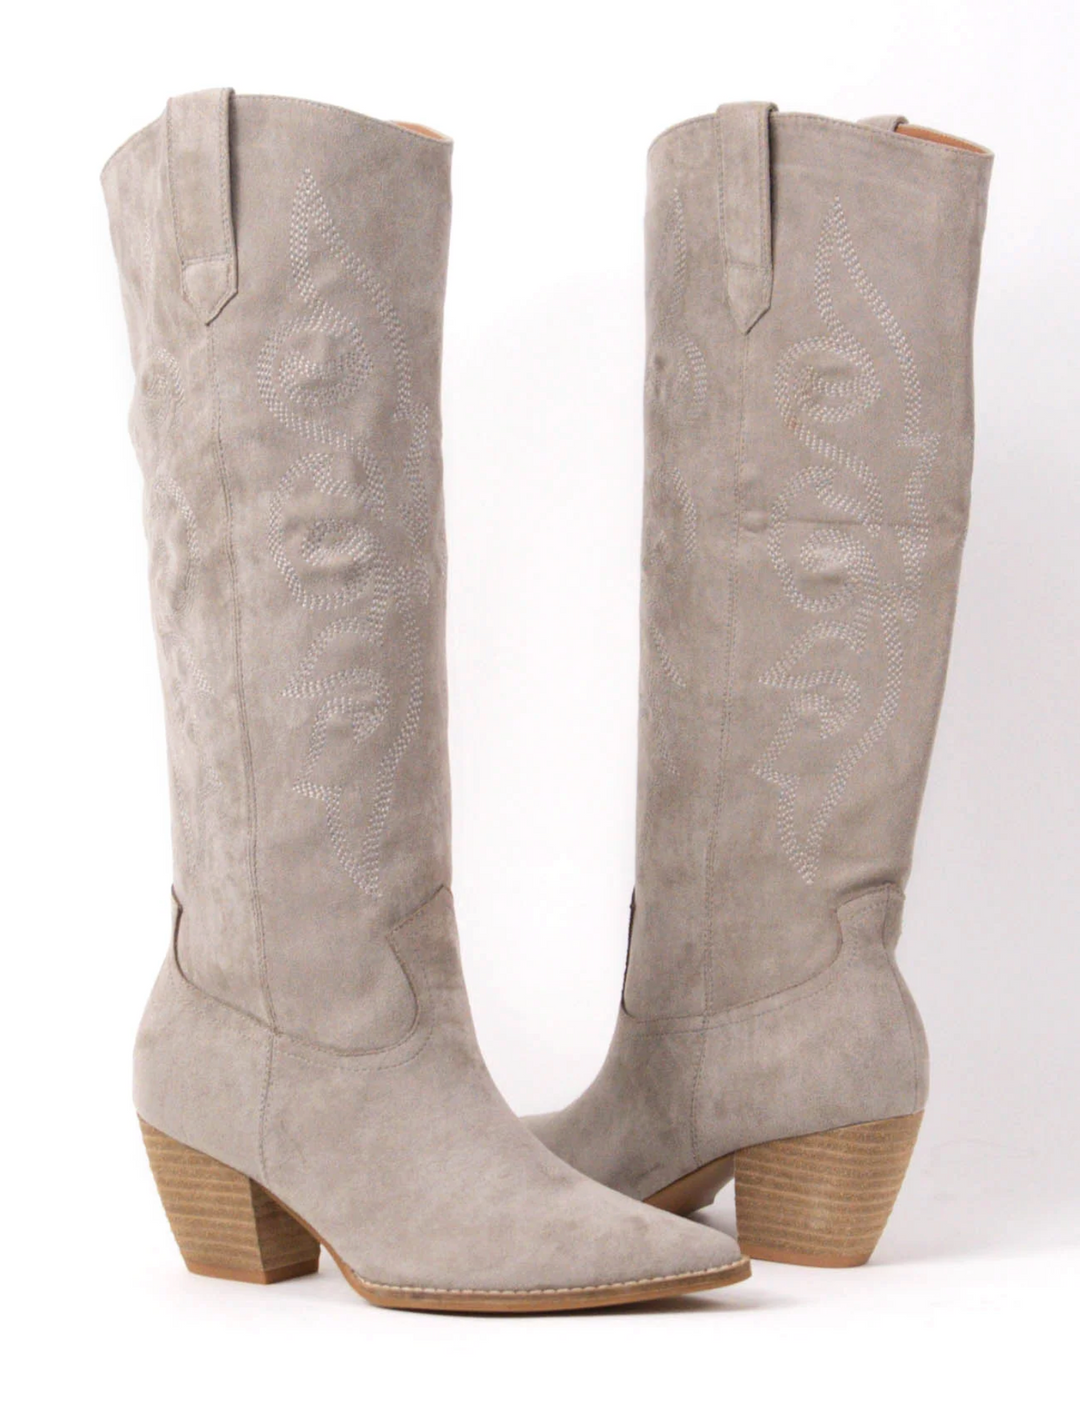 Beatrice Boots In Grey - ShopSpoiled